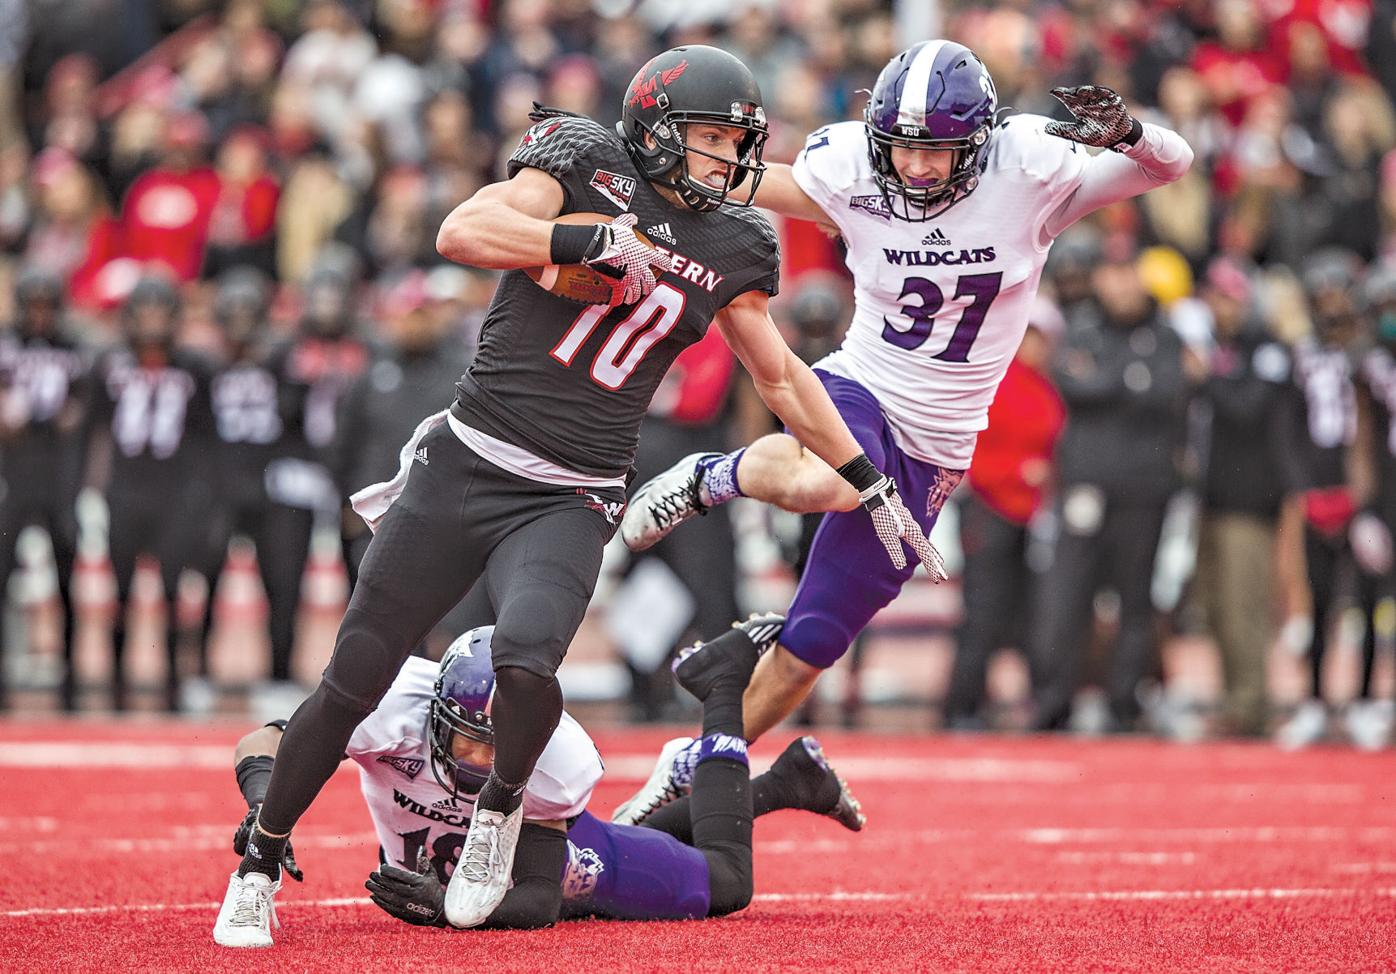 You did good': Former EWU star Cooper Kupp helped put Cheney on the  national map; he's still fighting to keep it there